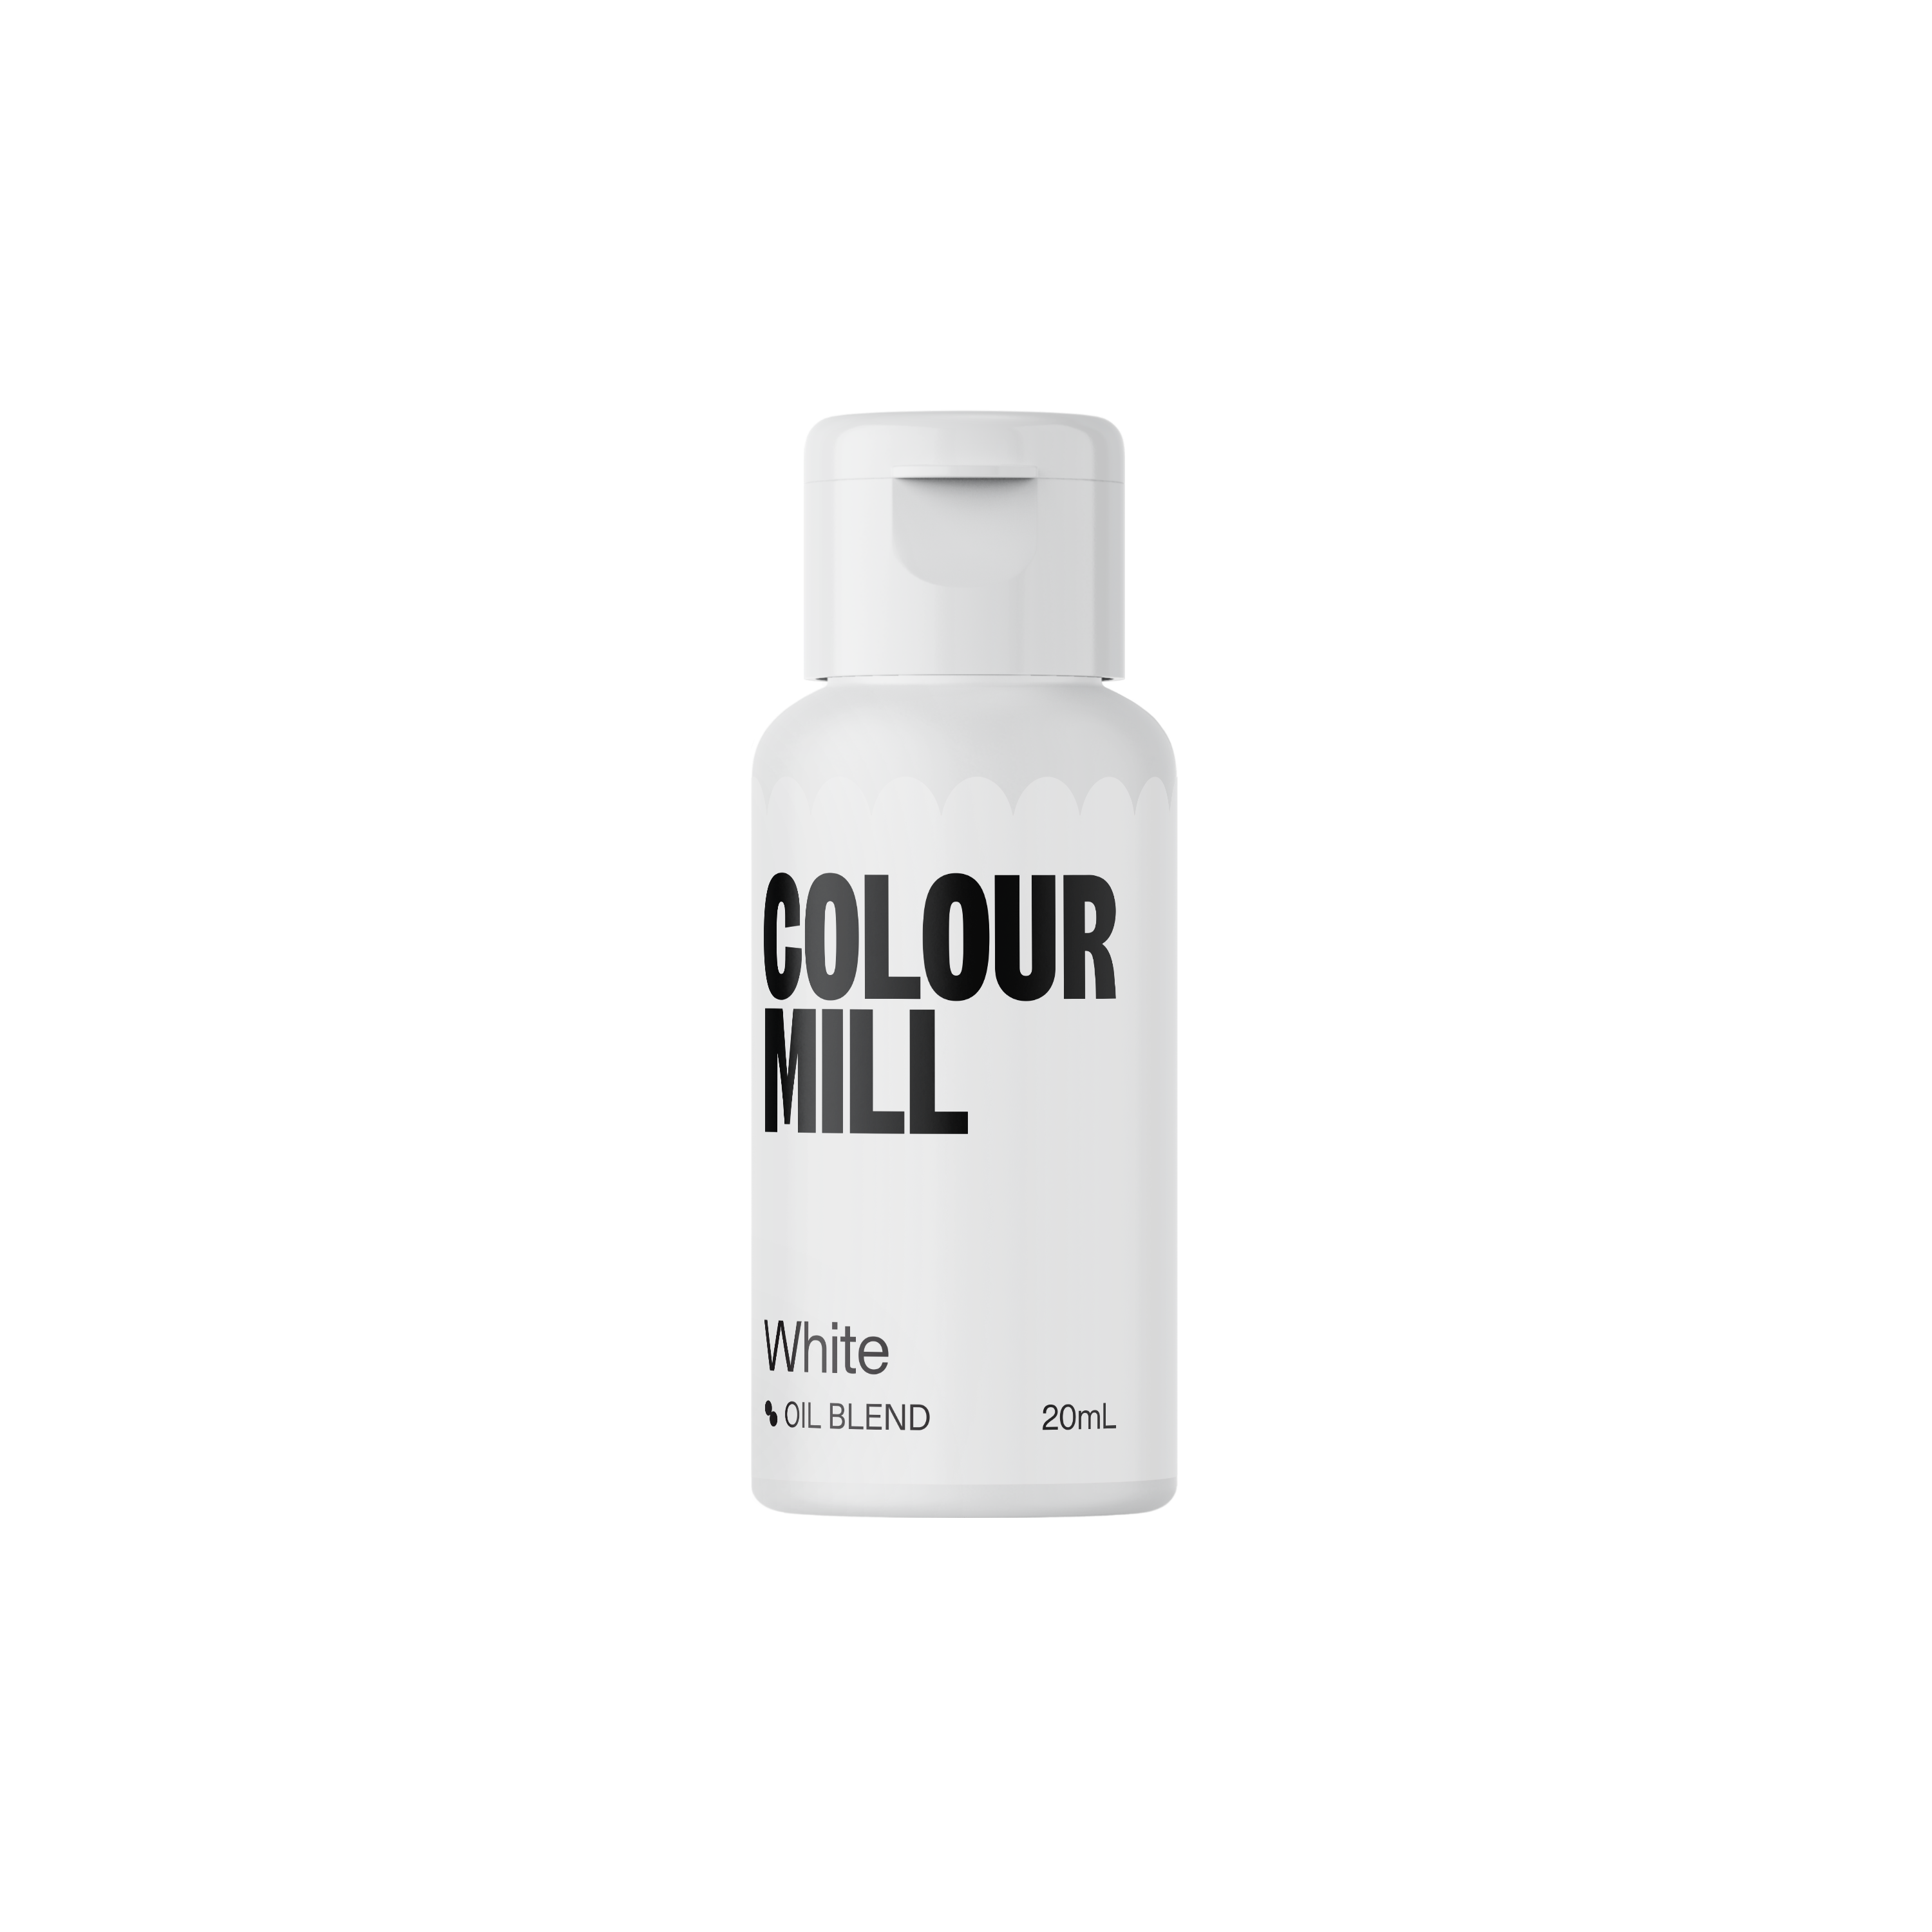 Colour Mill Oil-Based Food Coloring, 100 Milliliters Black 